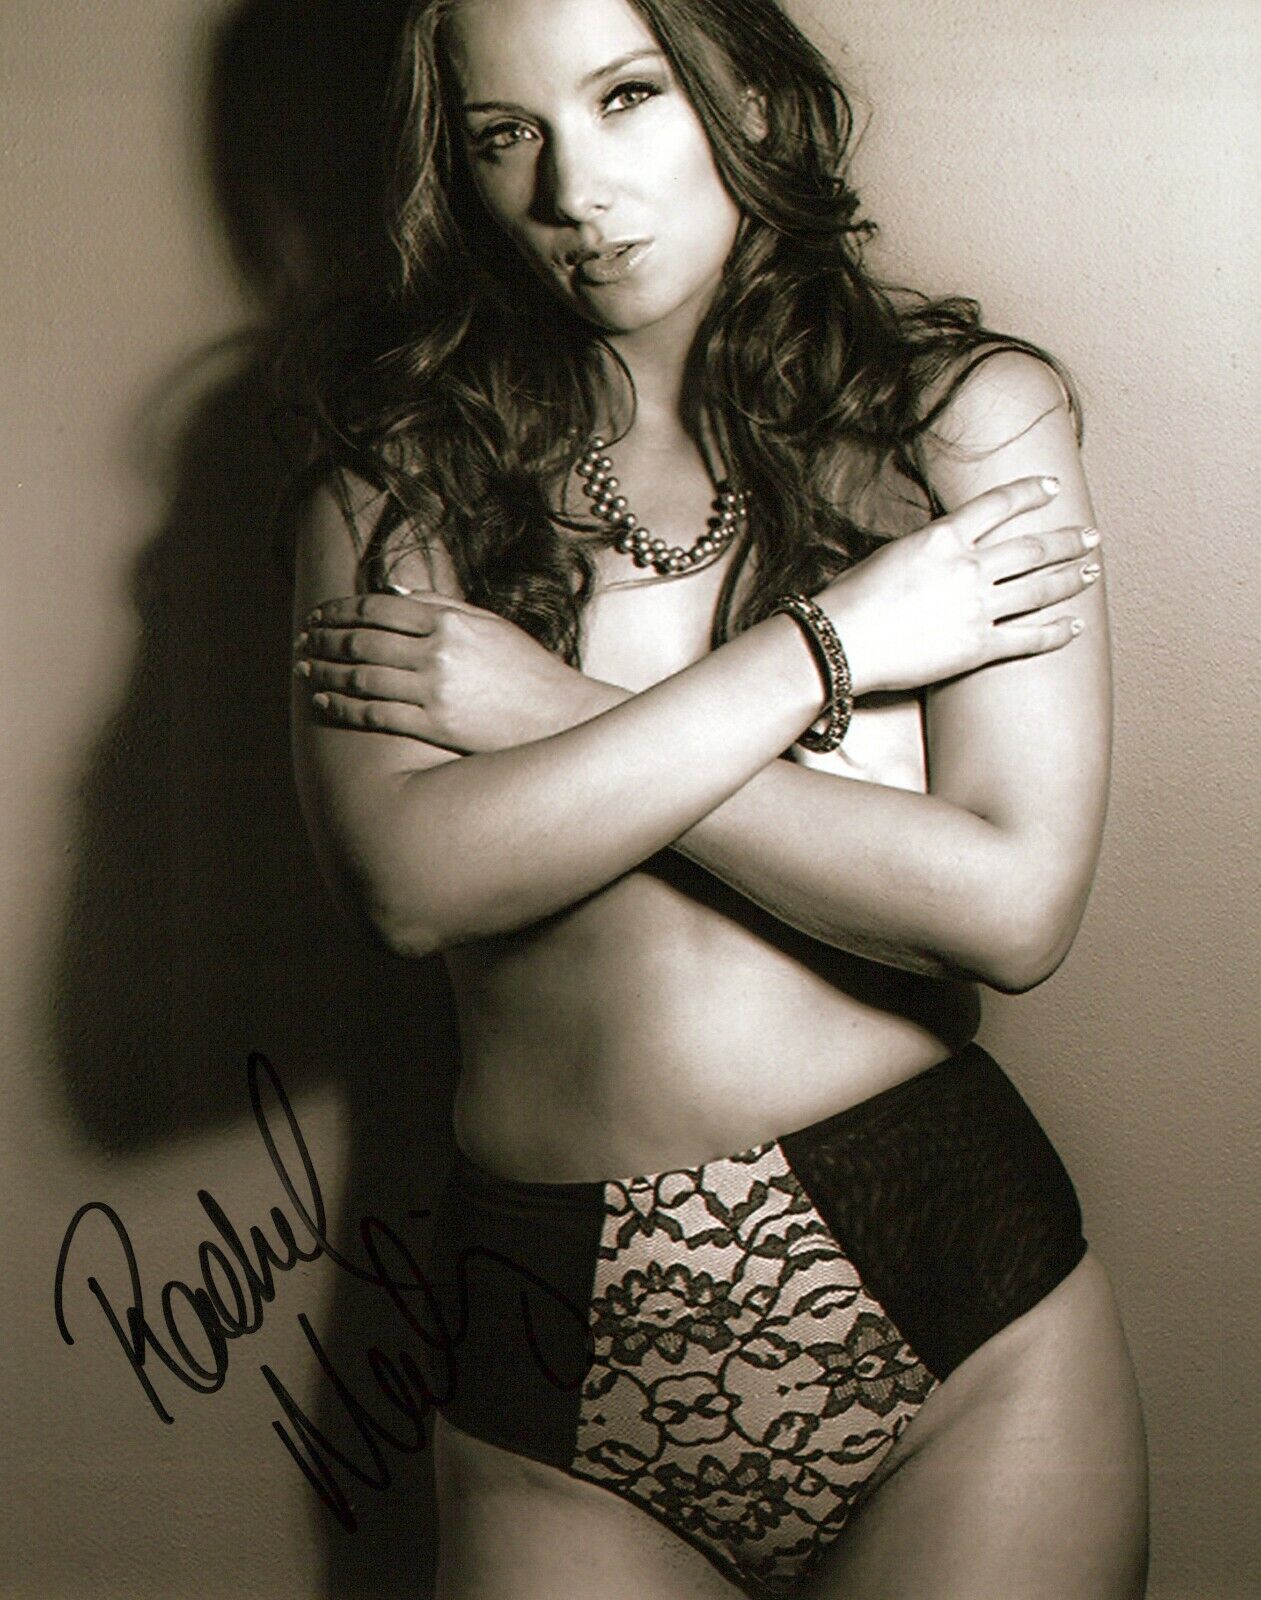 Rachel Mullins glamour shot autographed Photo Poster painting signed 8x10 #5